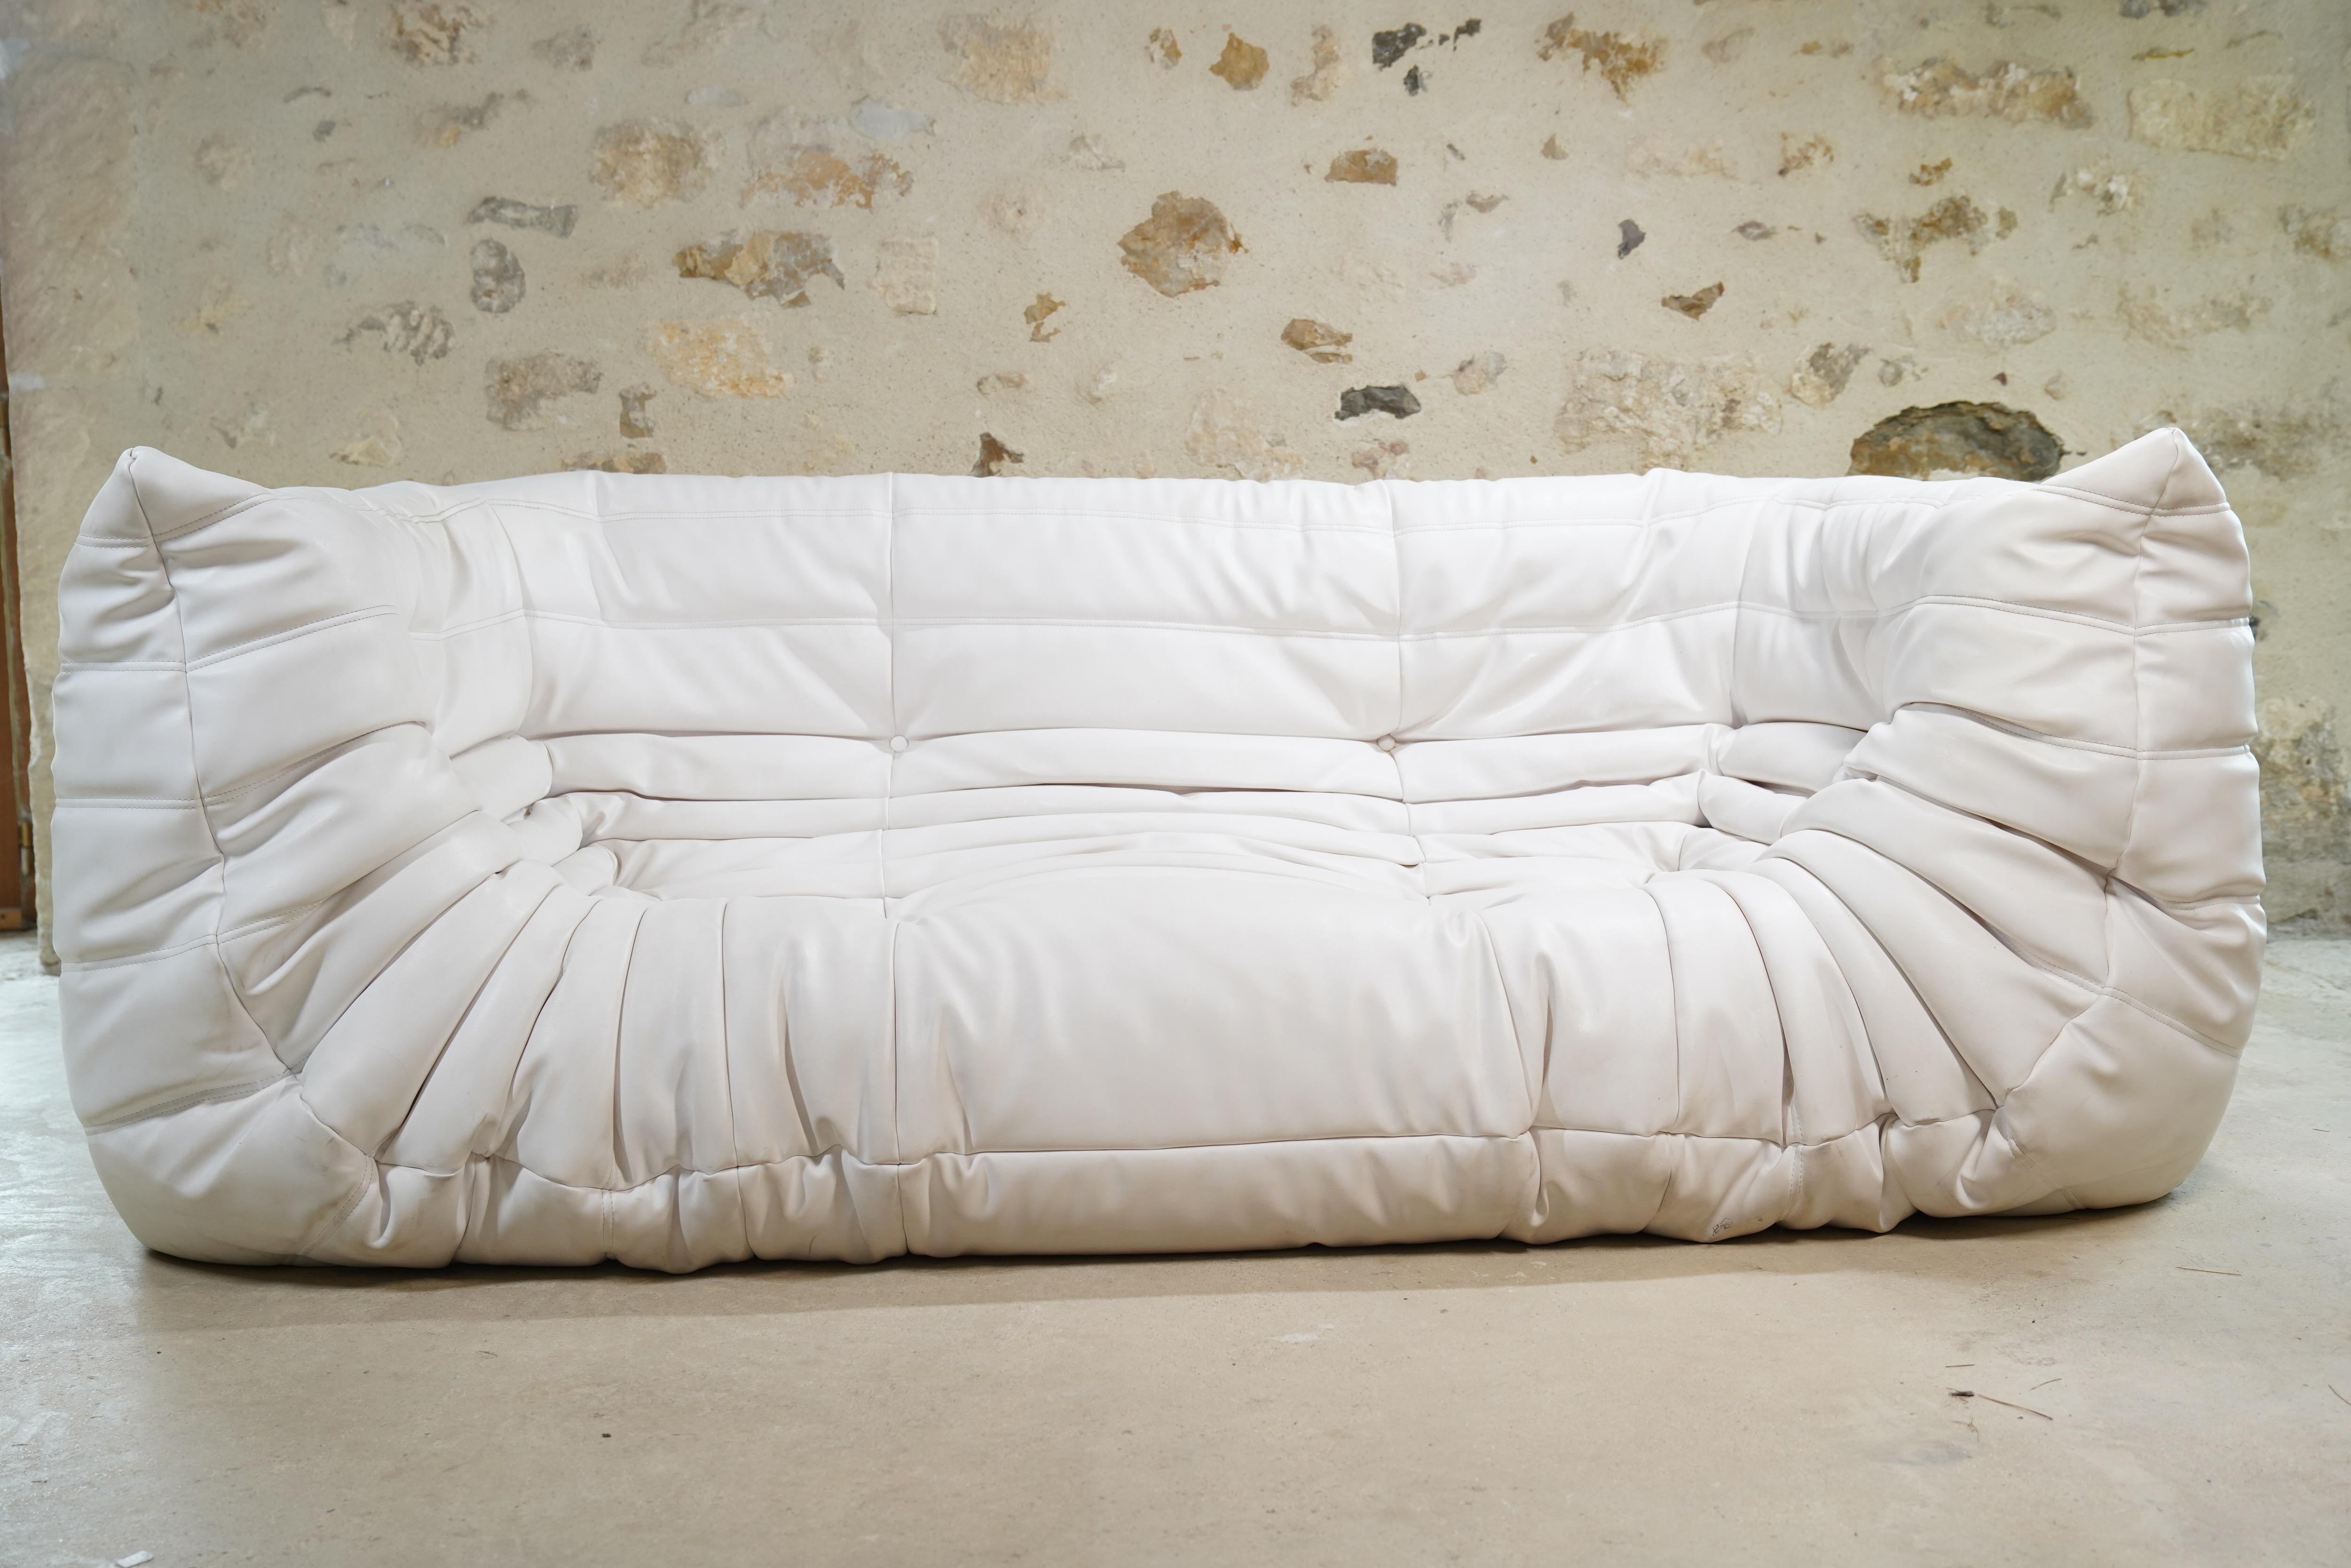 Gorgeous three-seater white leather Togo sofa designed by Michel Ducaroy for Ligne Roset from 2008. (Two available - the other is in a separate listing).

Designer Michel Ducaroy drew inspiration for the Togo's design from an aluminum toothpaste